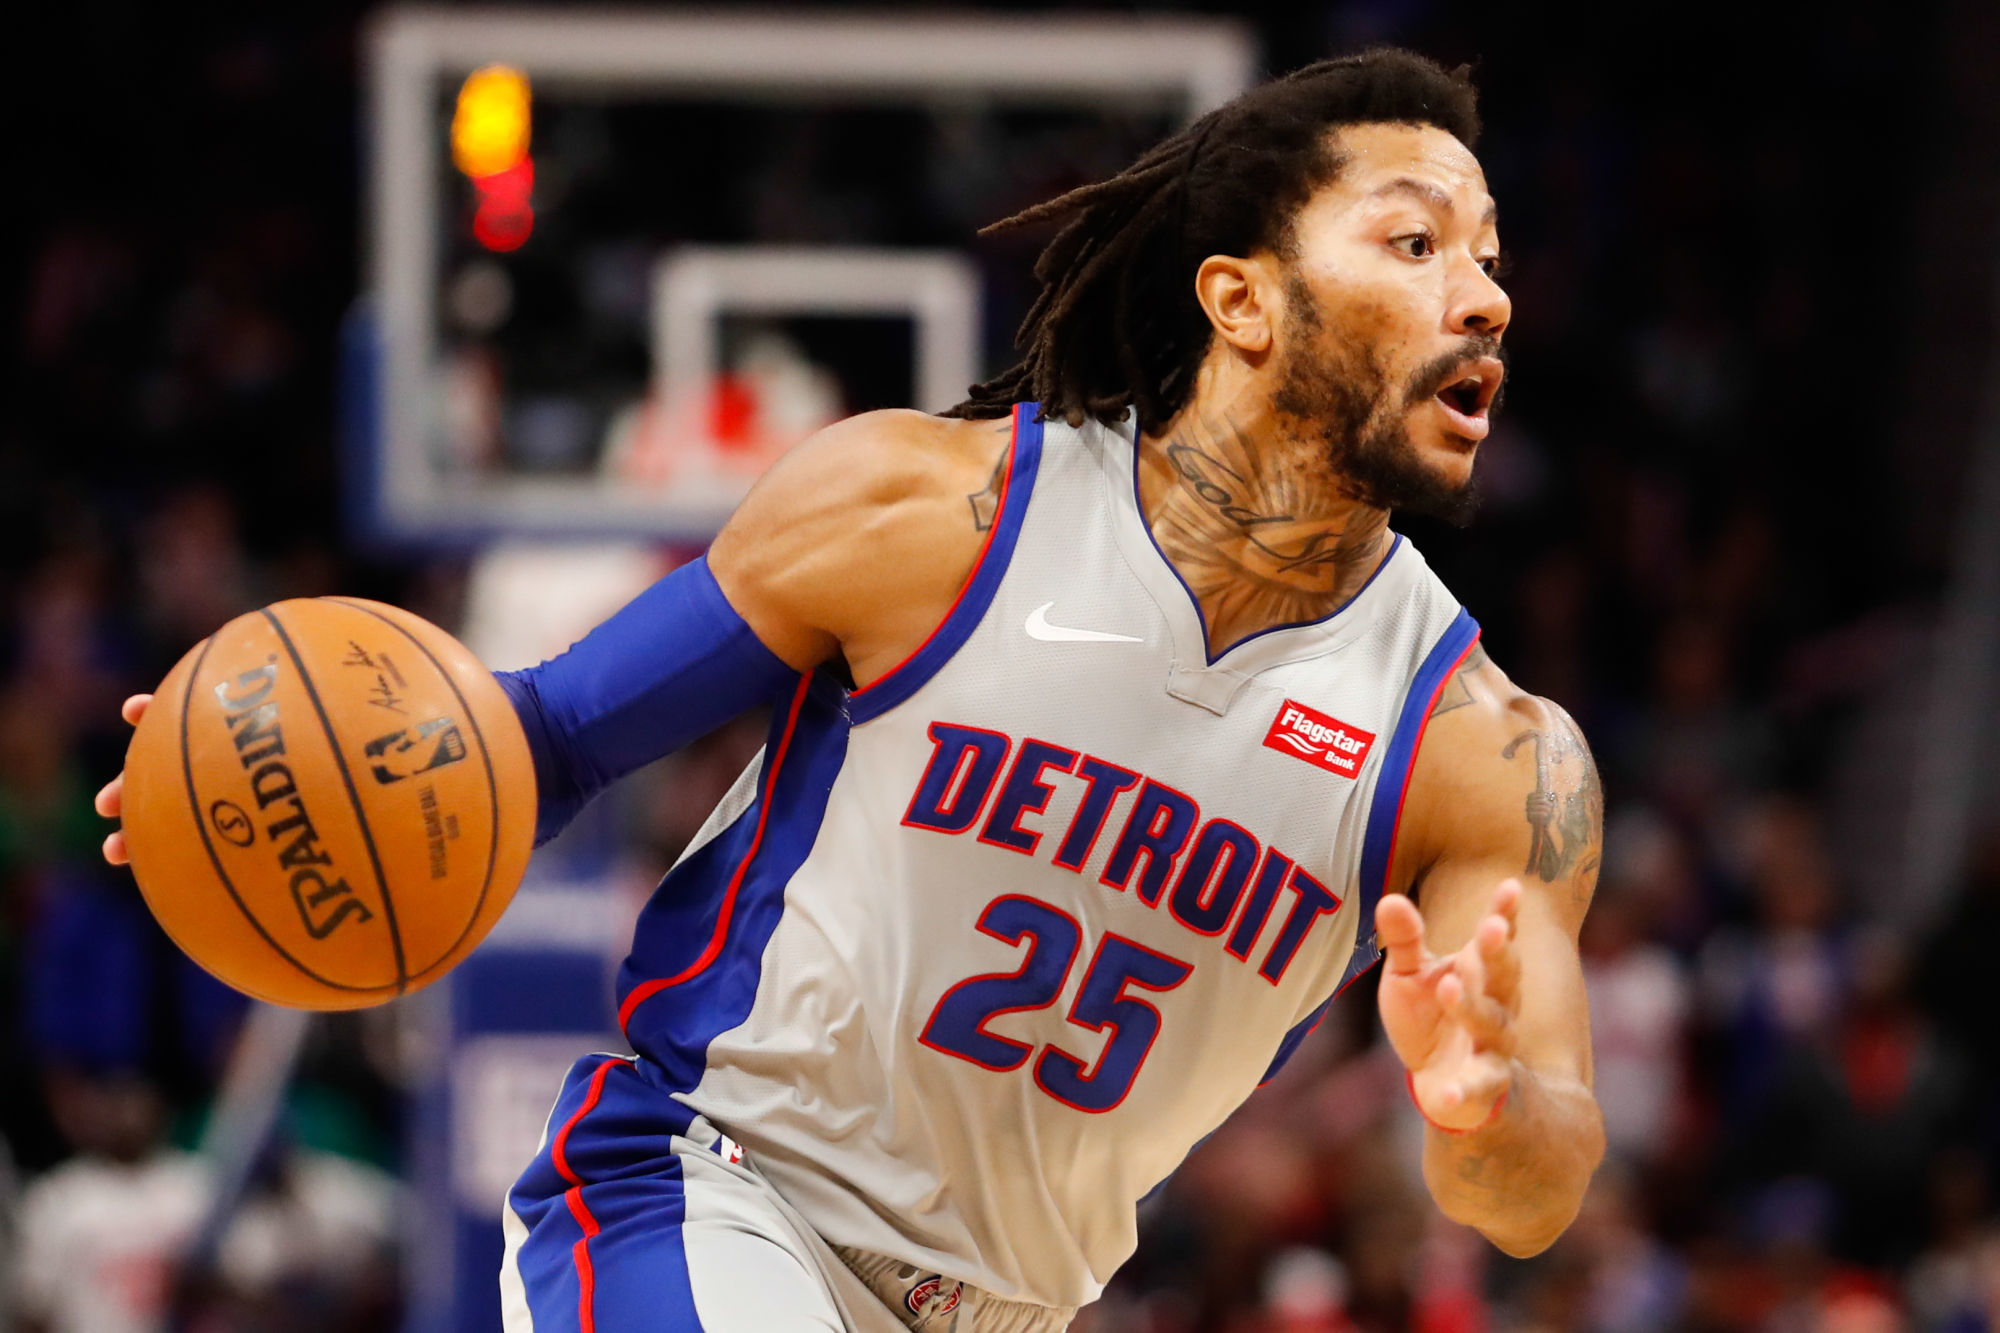 Dec 6, 2019; Detroit, MI, USA; Detroit Pistons guard Derrick Rose (25) drives to the basket during the fourth quarter against the Indiana Pacers at Little Caesars Arena. Mandatory Credit: Raj Mehta-USA TODAY Sports/Sipa USA 

Photo by Icon Sport - Derrick ROSE - Little Caesars Arena - Detroit (Etats Unis)